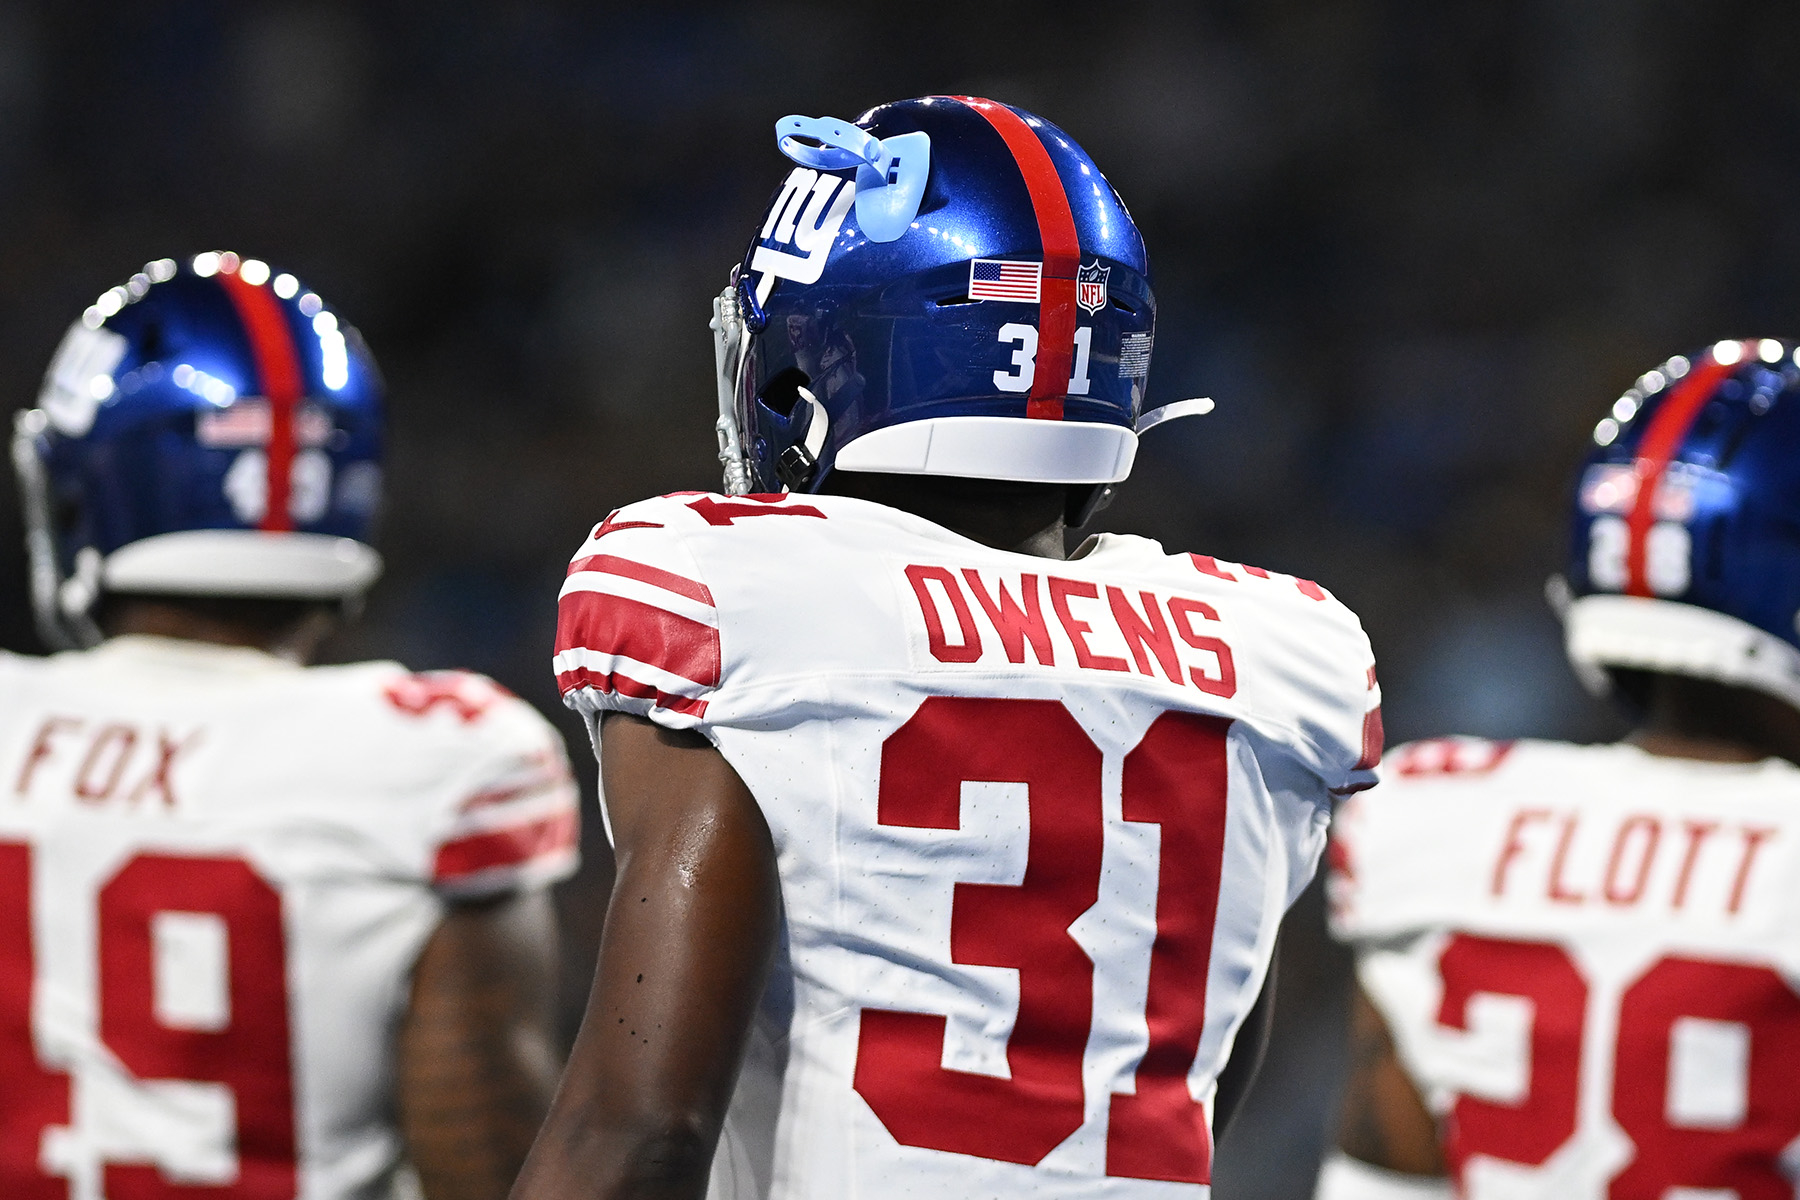 The Giants could get tremendous value from their seventhround rookies